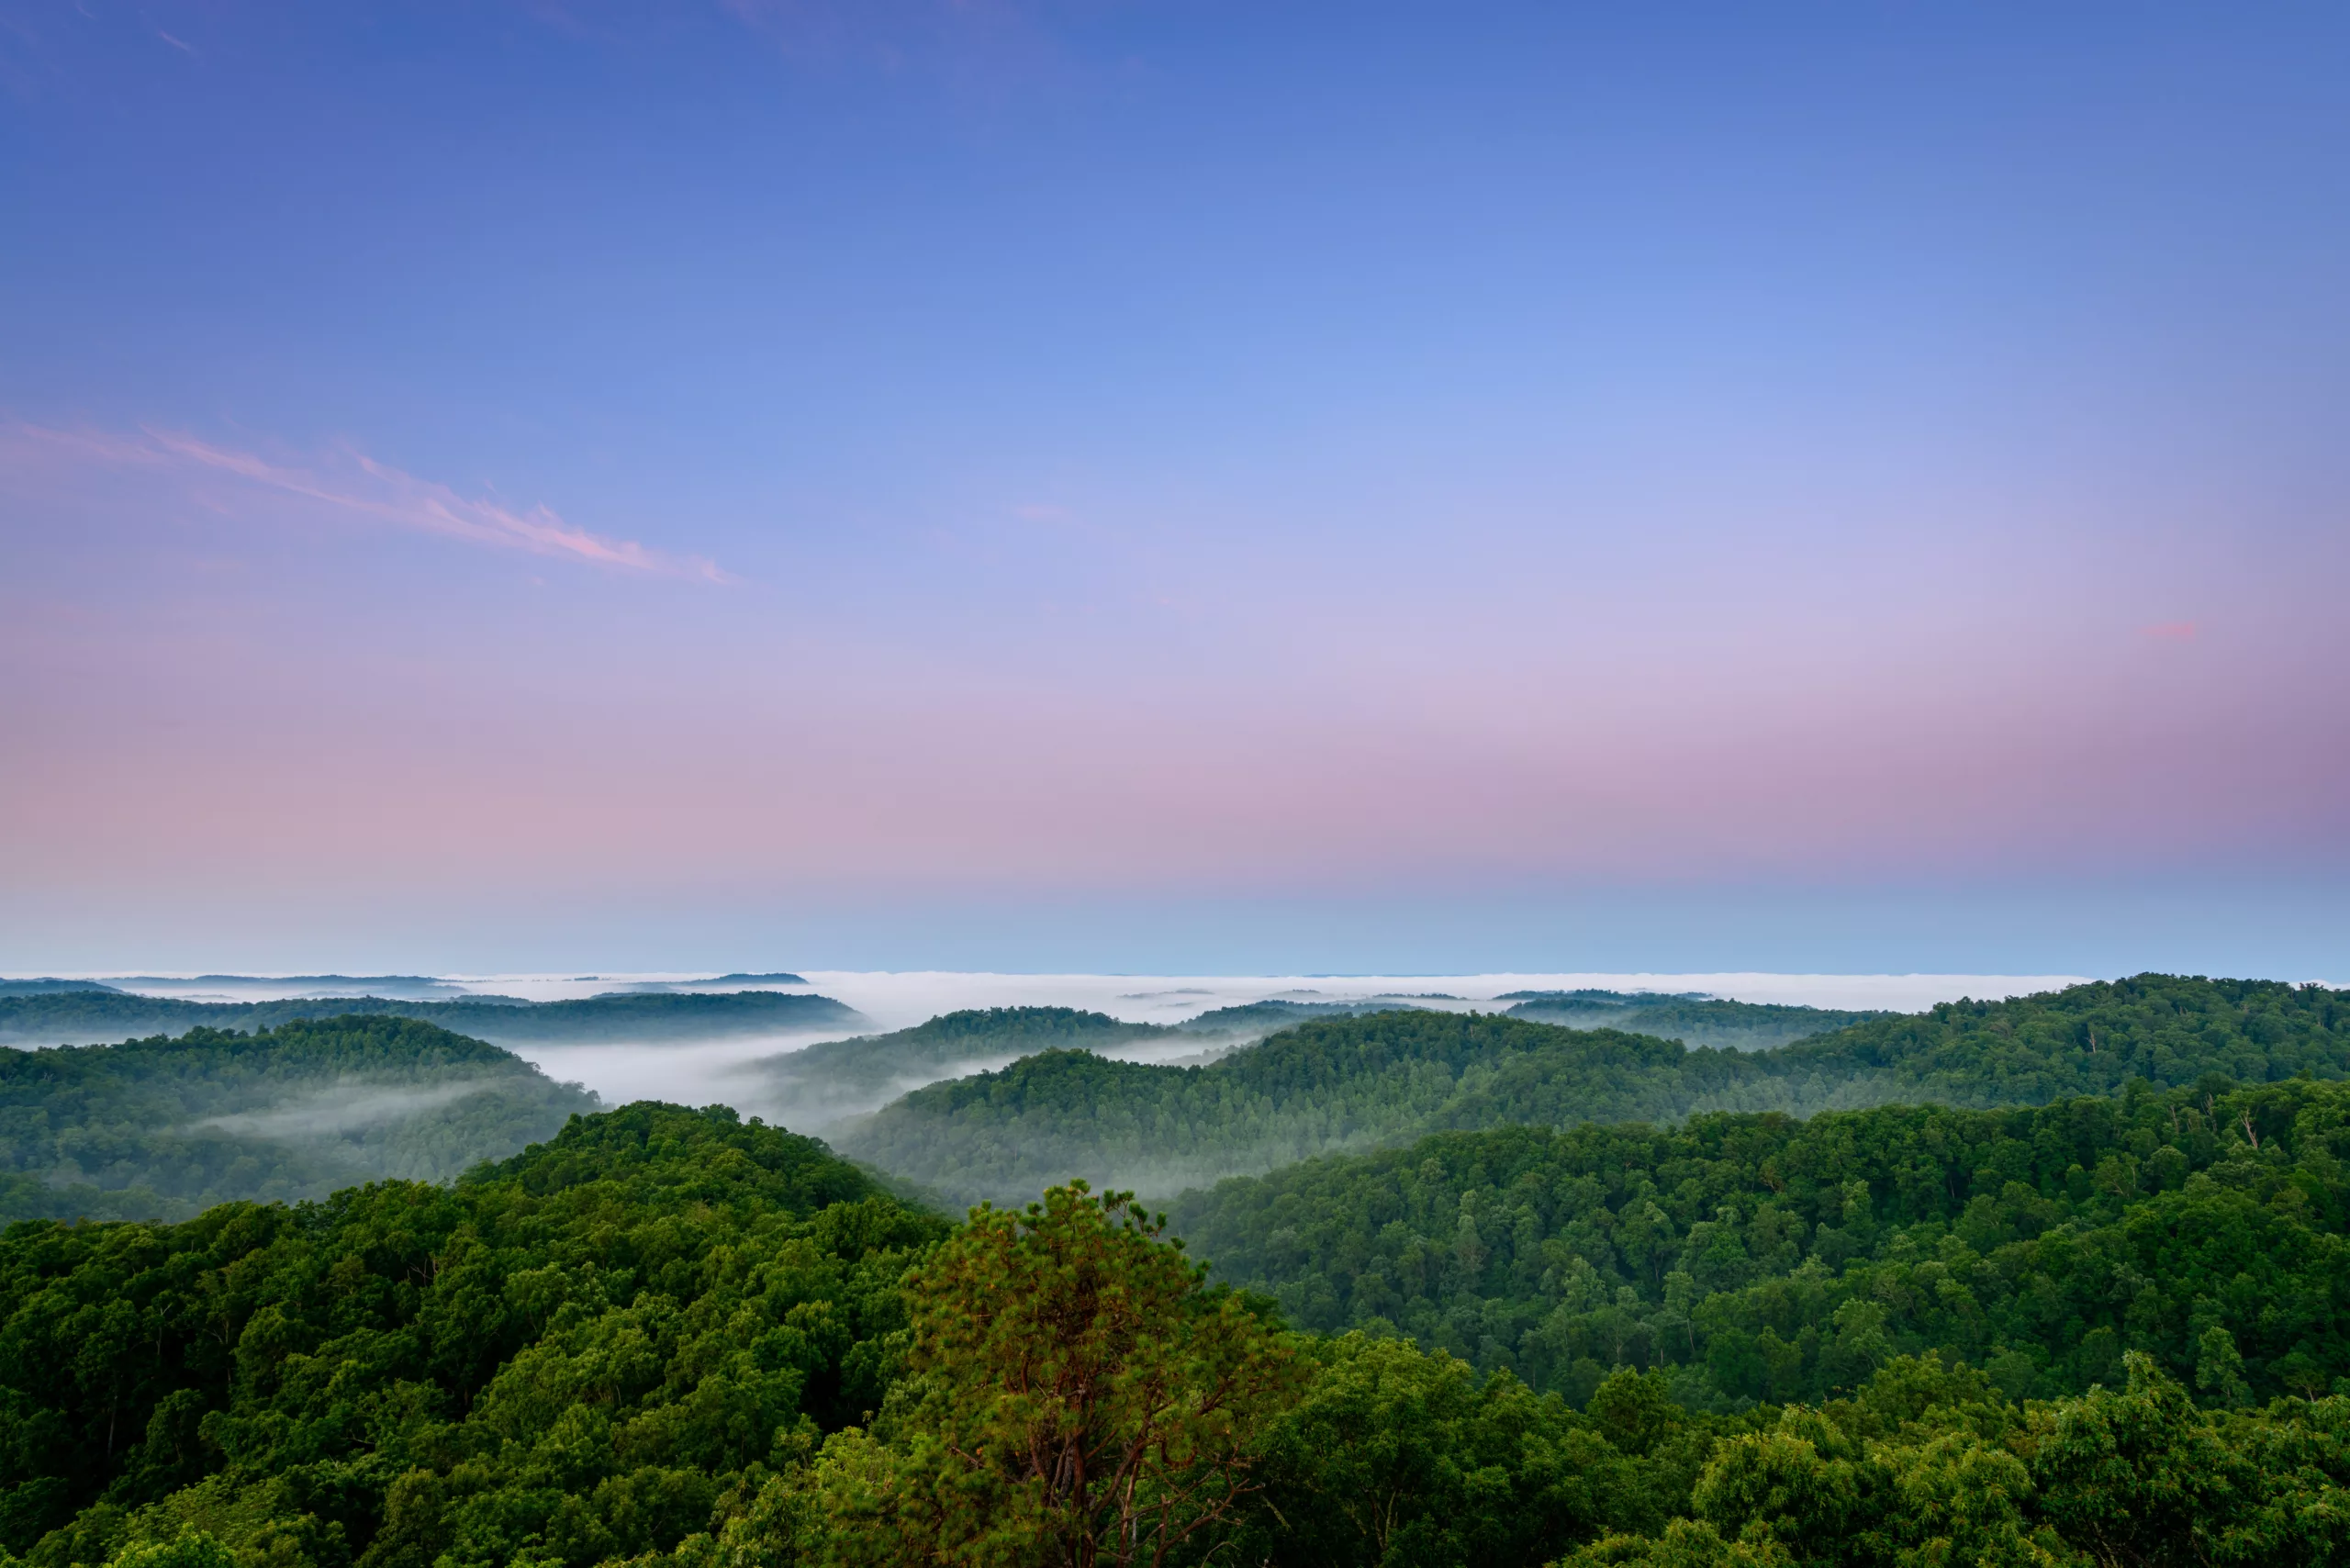 Report: Central Appalachia Could Be a Safe Haven for Climate Change Migrants